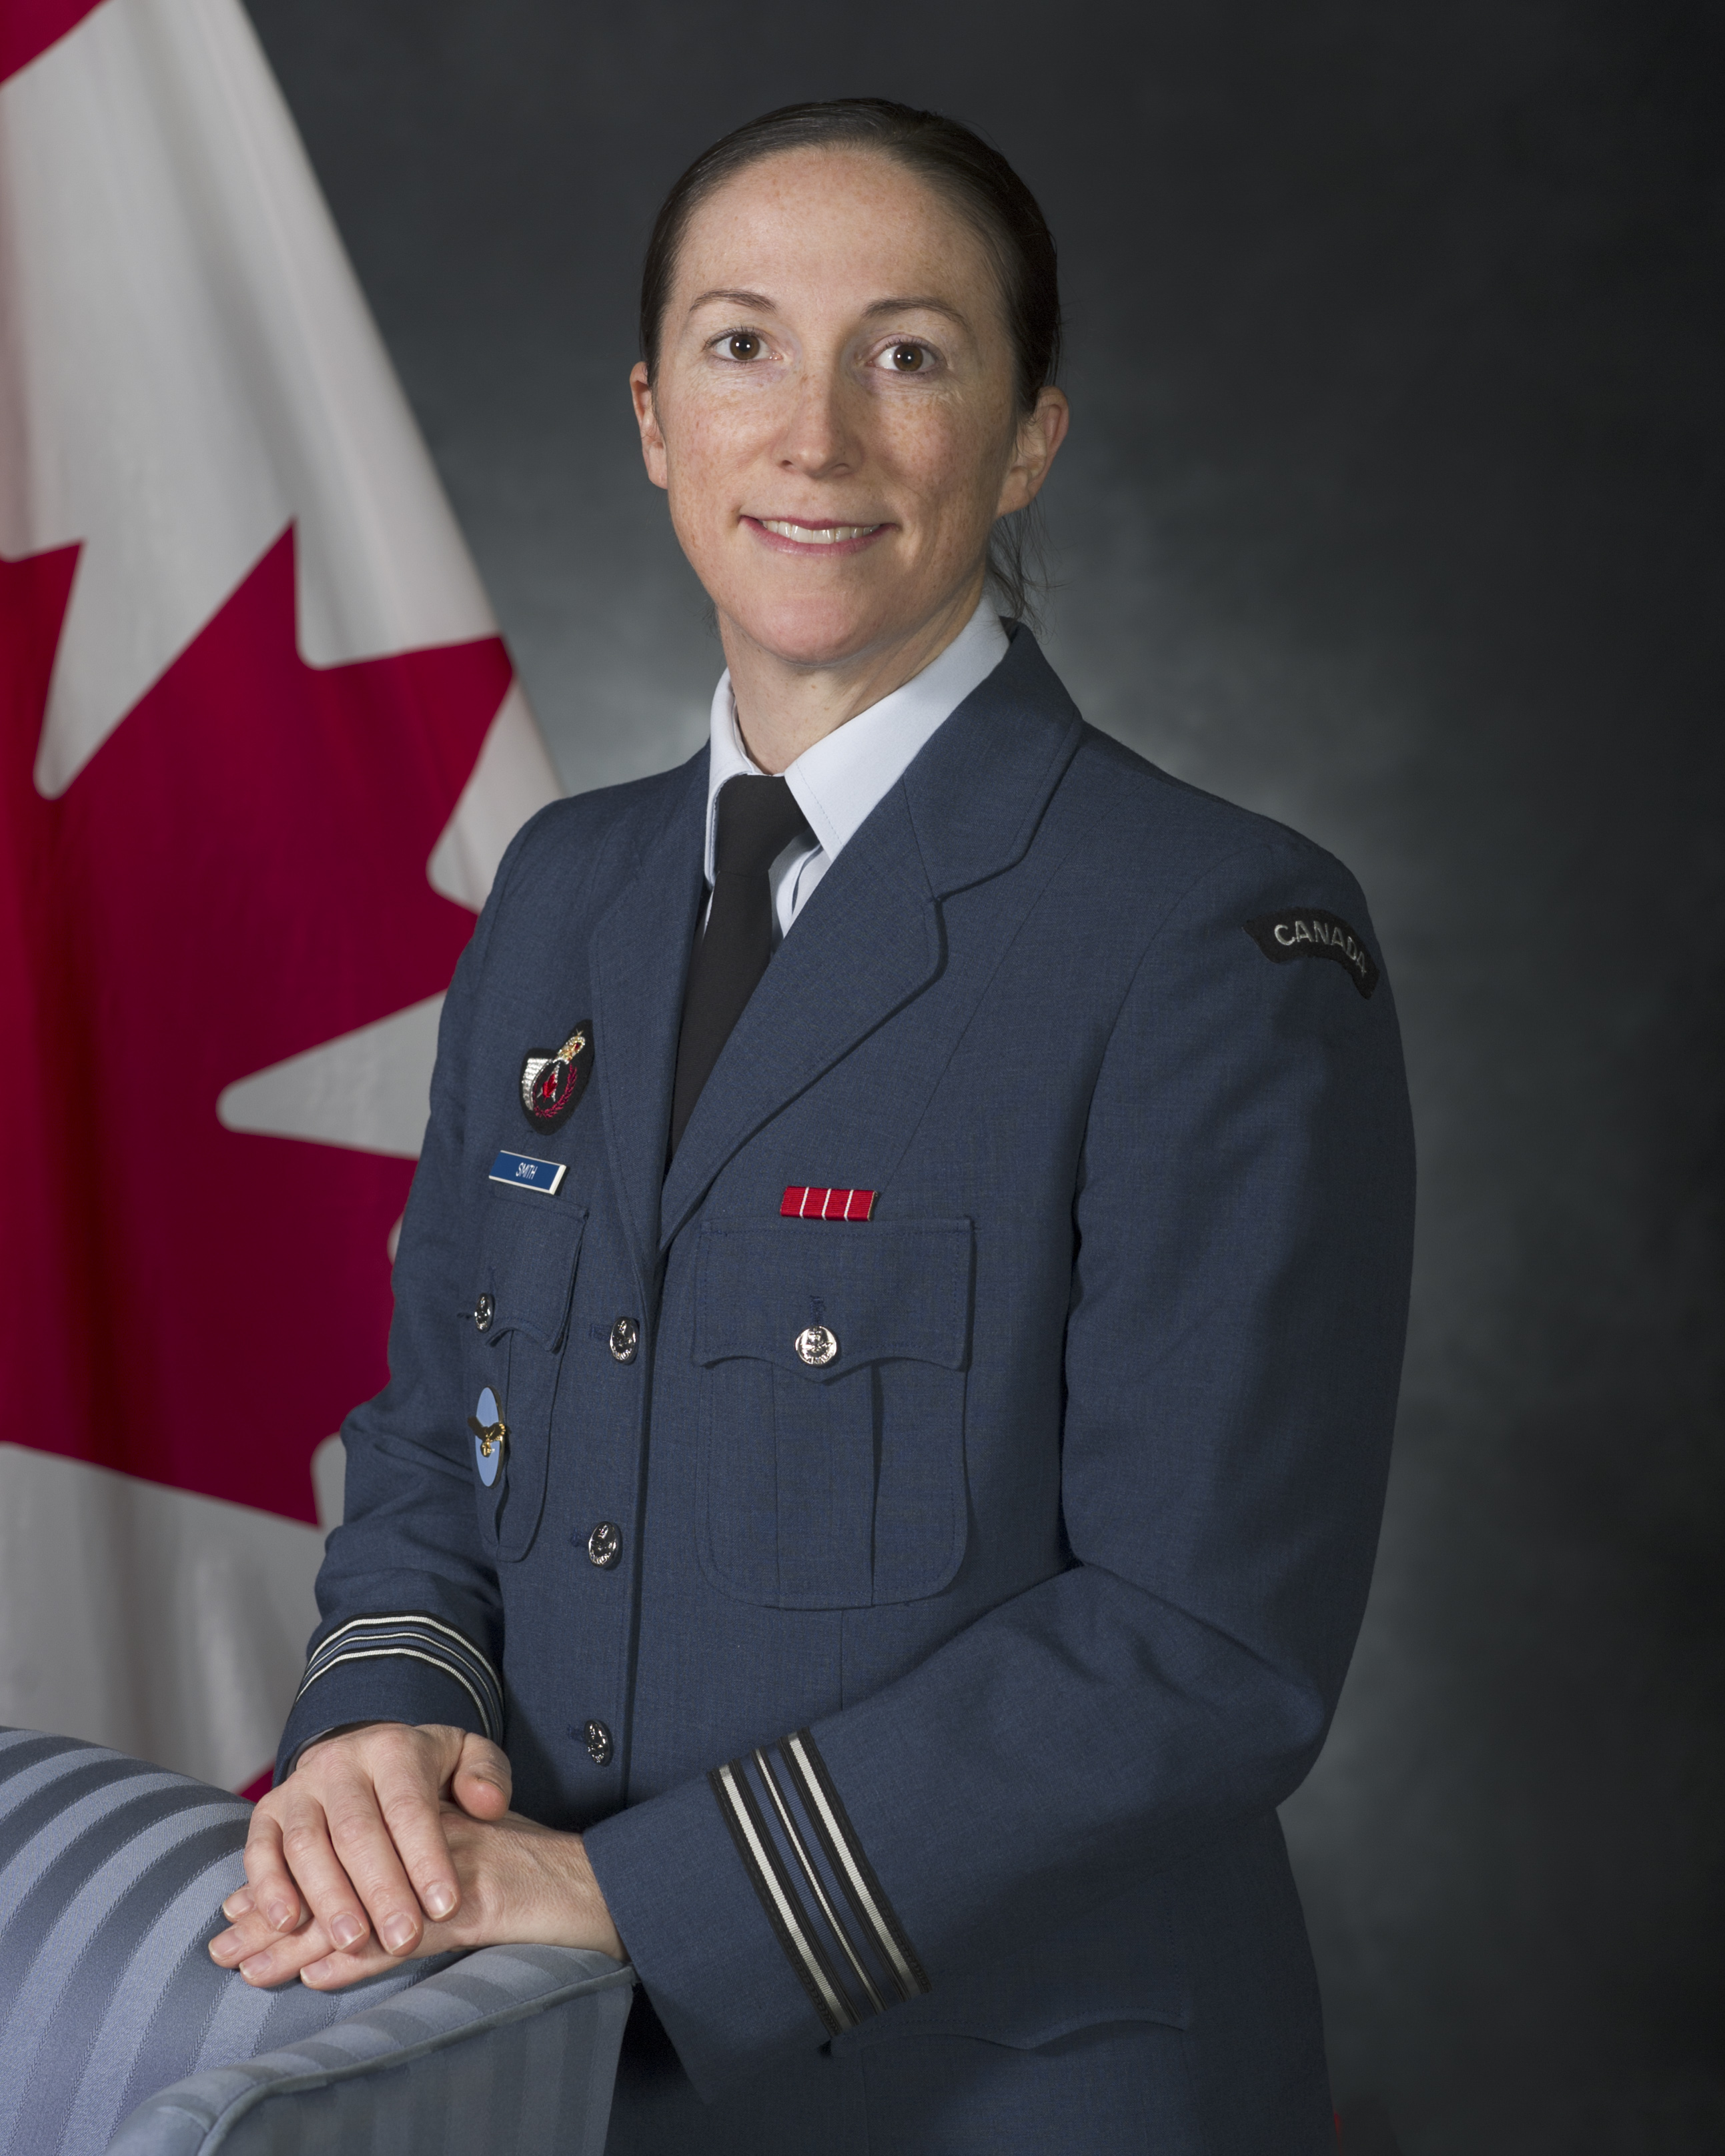 A smiling woman wearing a blue military uniform stands in front of a Canadian flag, her hands resting on a blue chair.